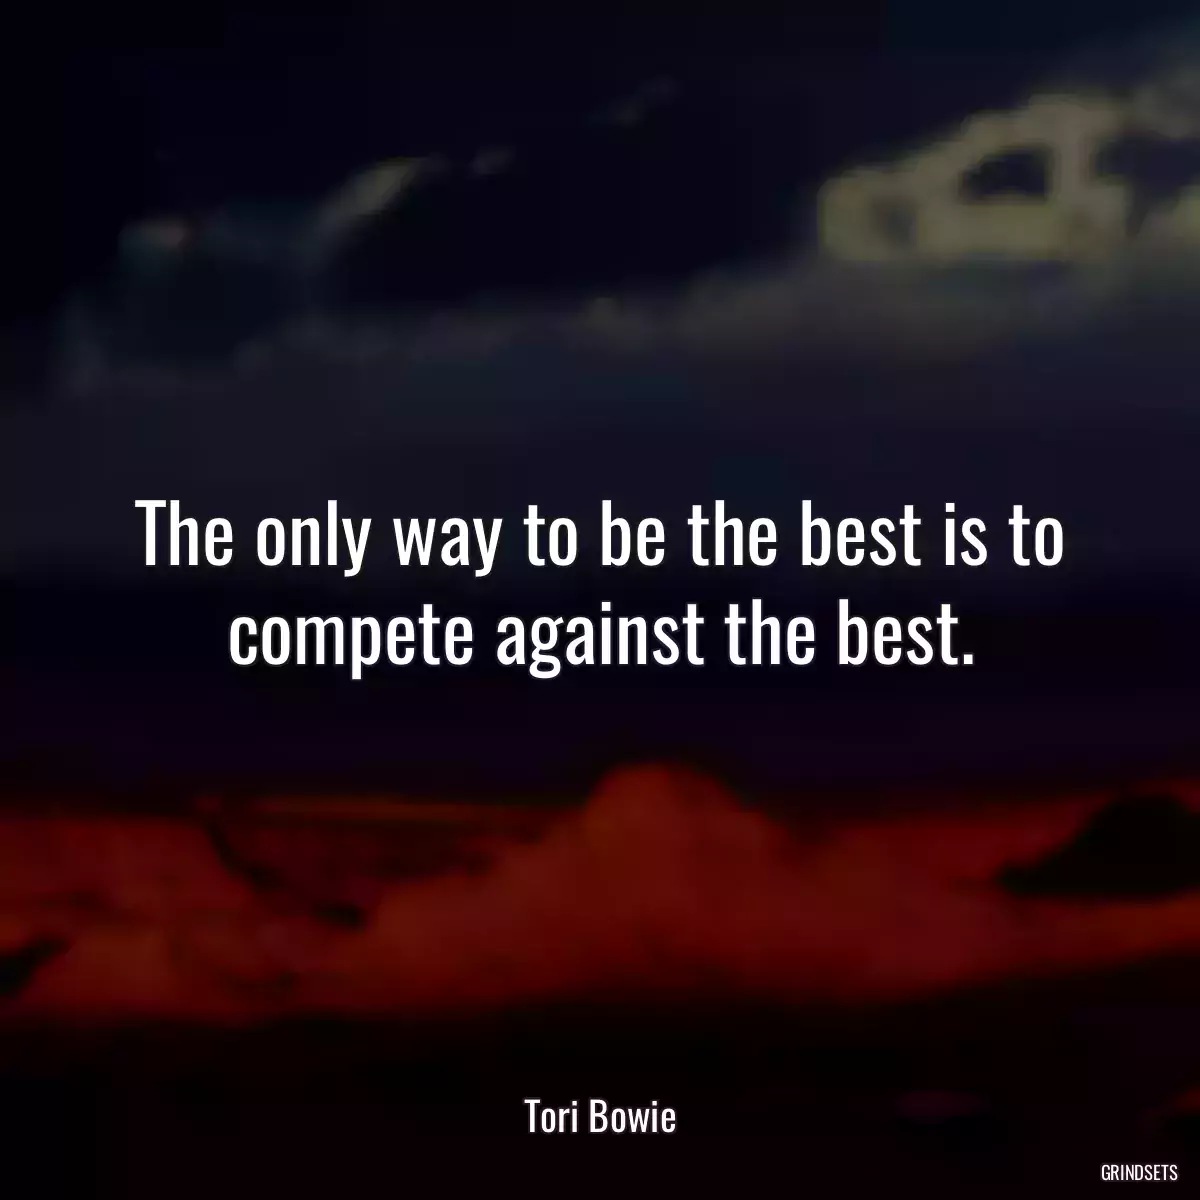 The only way to be the best is to compete against the best.